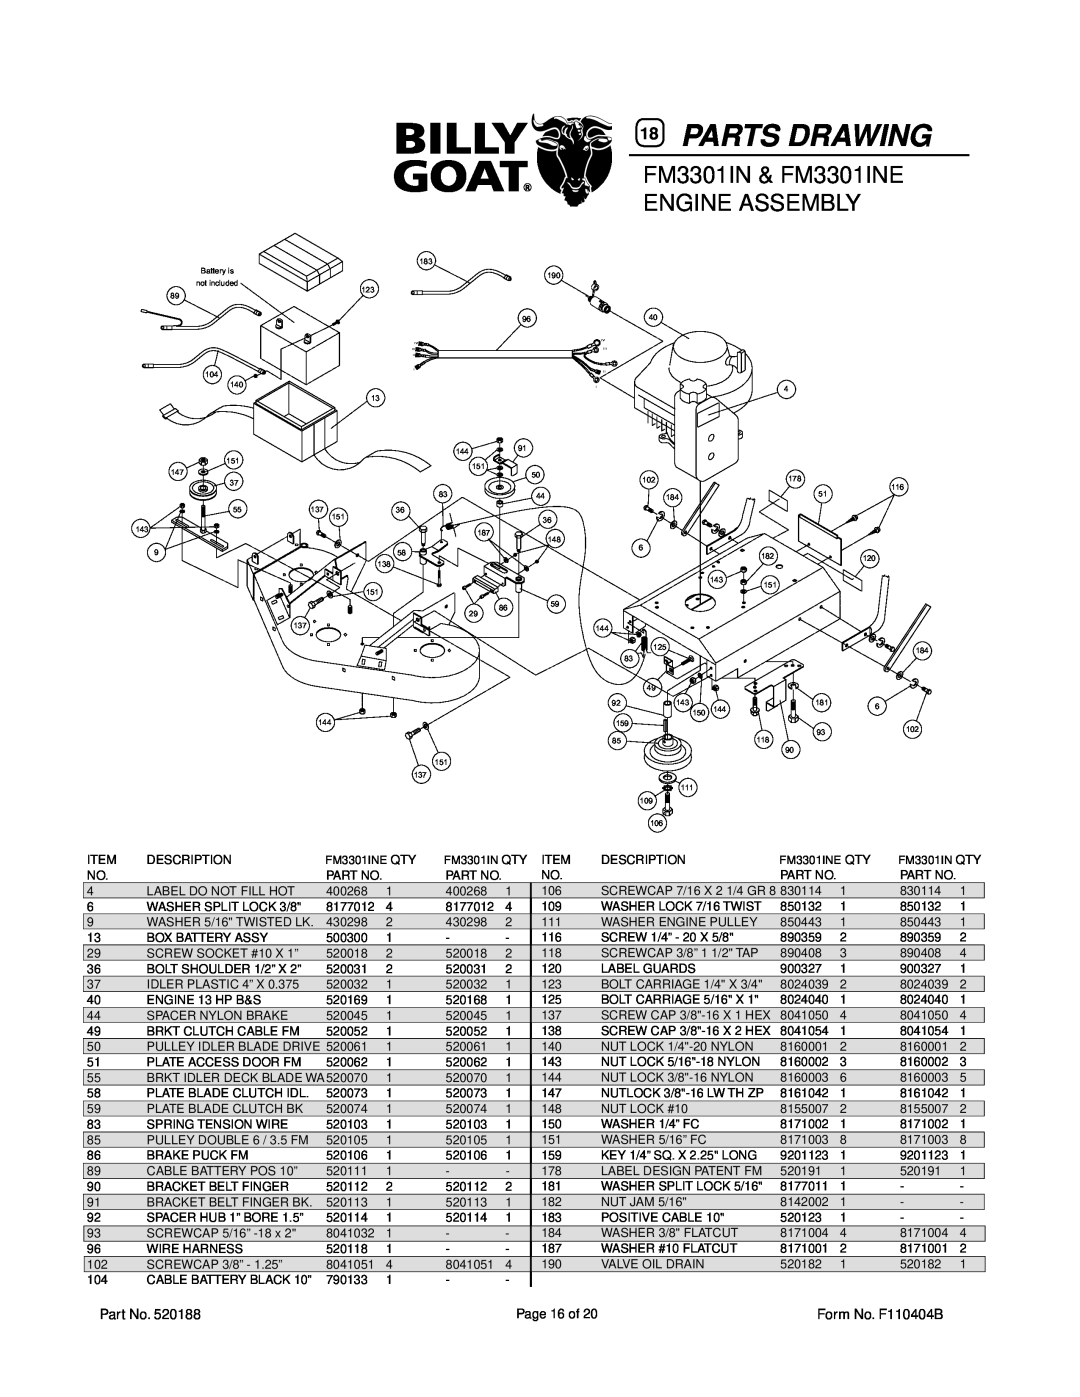 Billy Goat FM3301IN, FM3301INE owner manual FM3301IN & FM3301INE ENGINE ASSEMBLY, Parts Drawing 